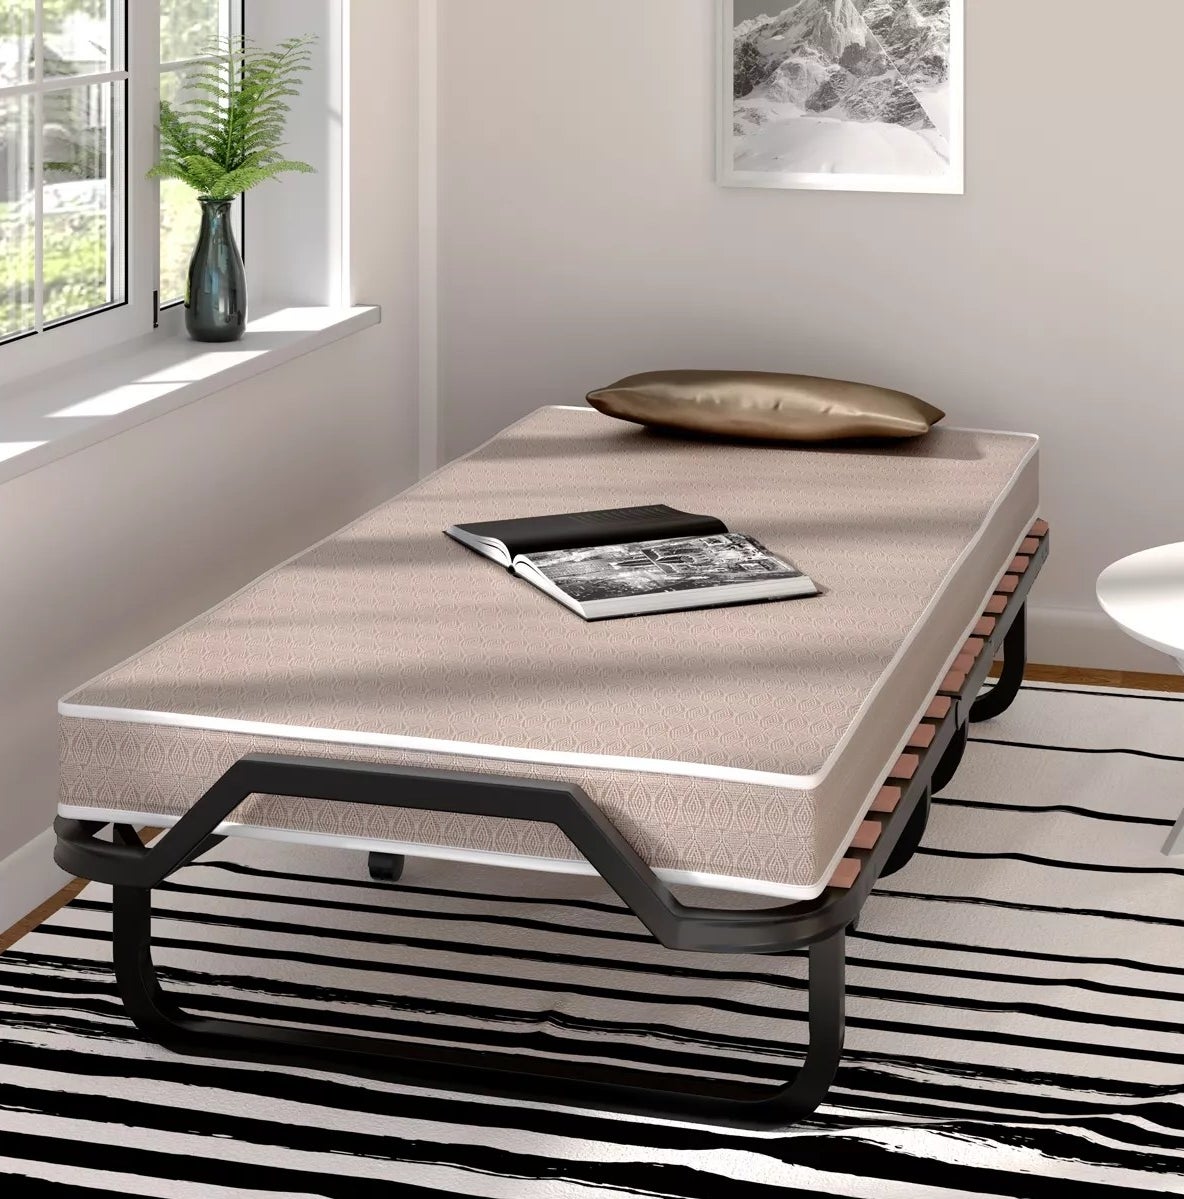 The folding guest bed